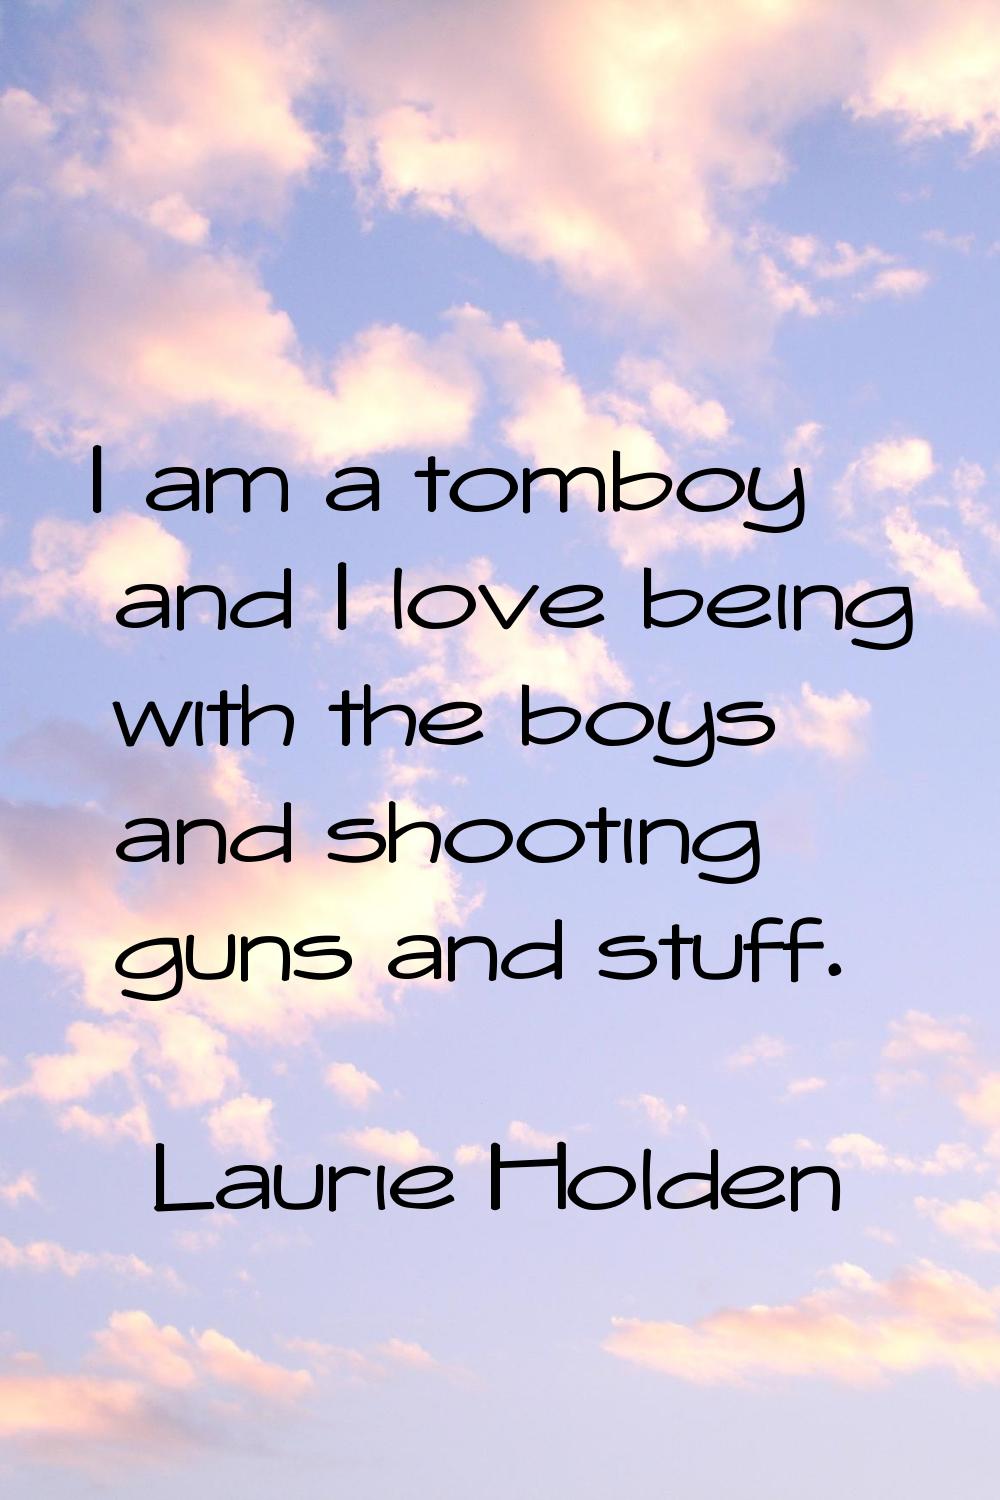 I am a tomboy and I love being with the boys and shooting guns and stuff.